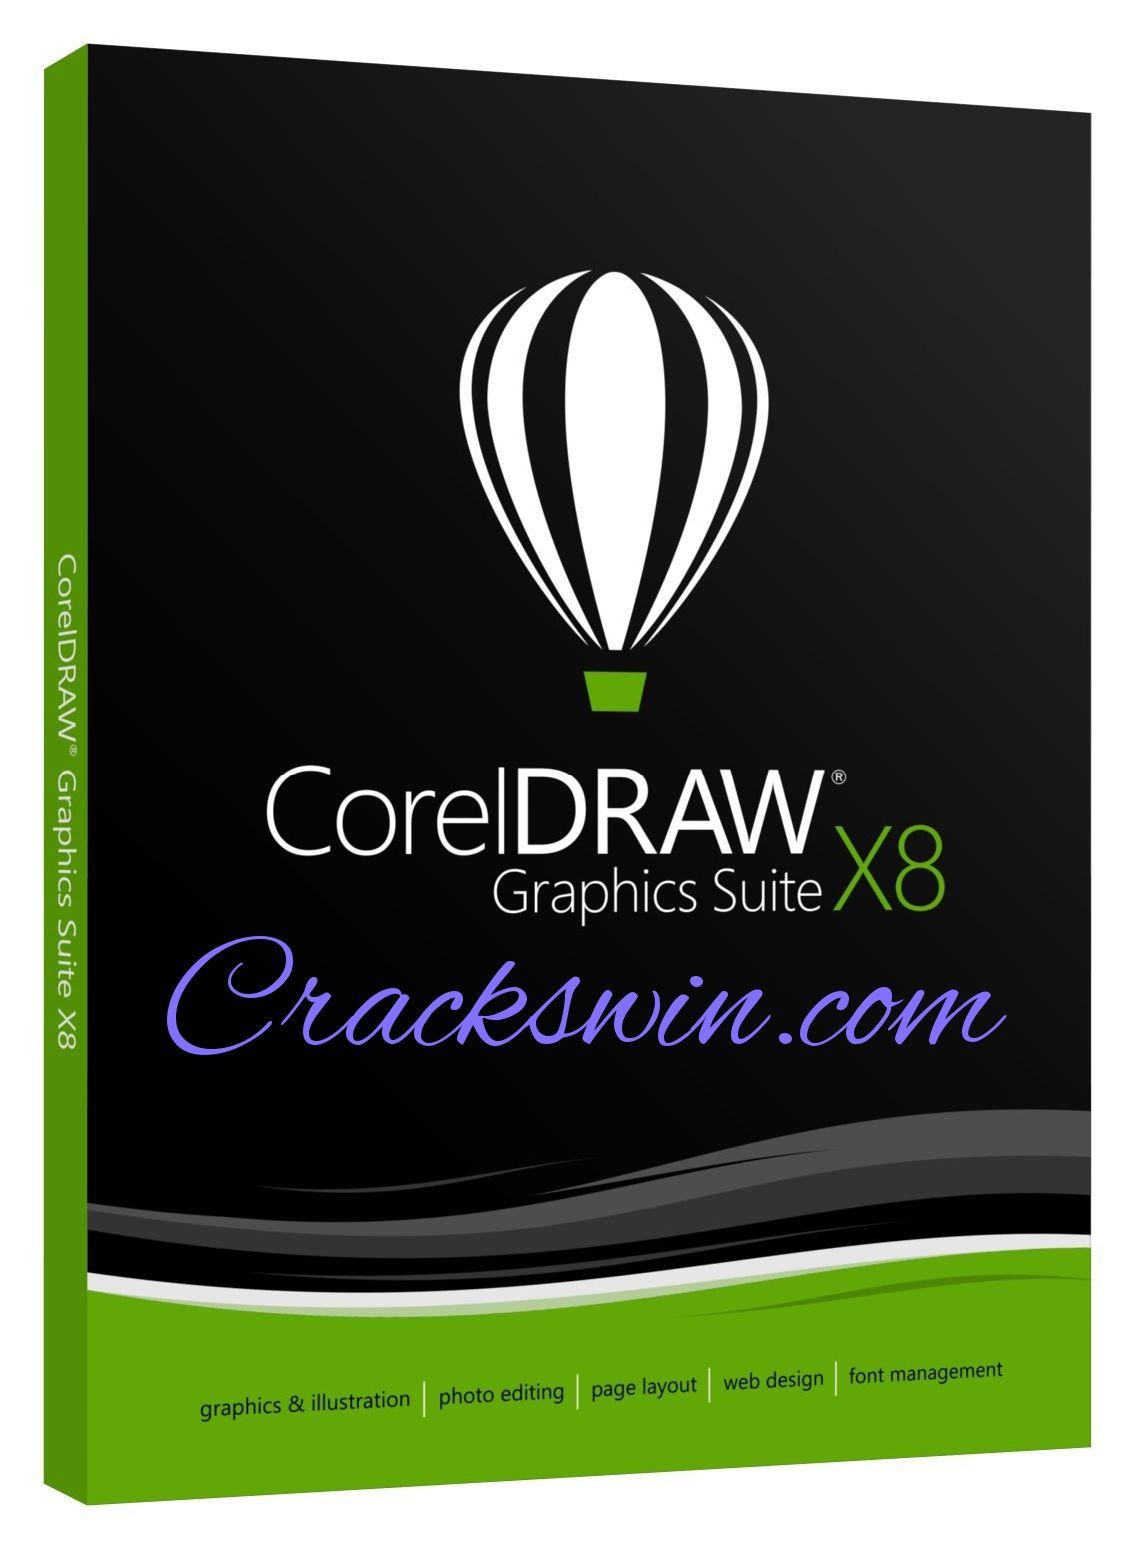 Cracked Software Logo - Pin by Muhammad Ali on Cracked-Pc | Pinterest | Software, Graphic ...